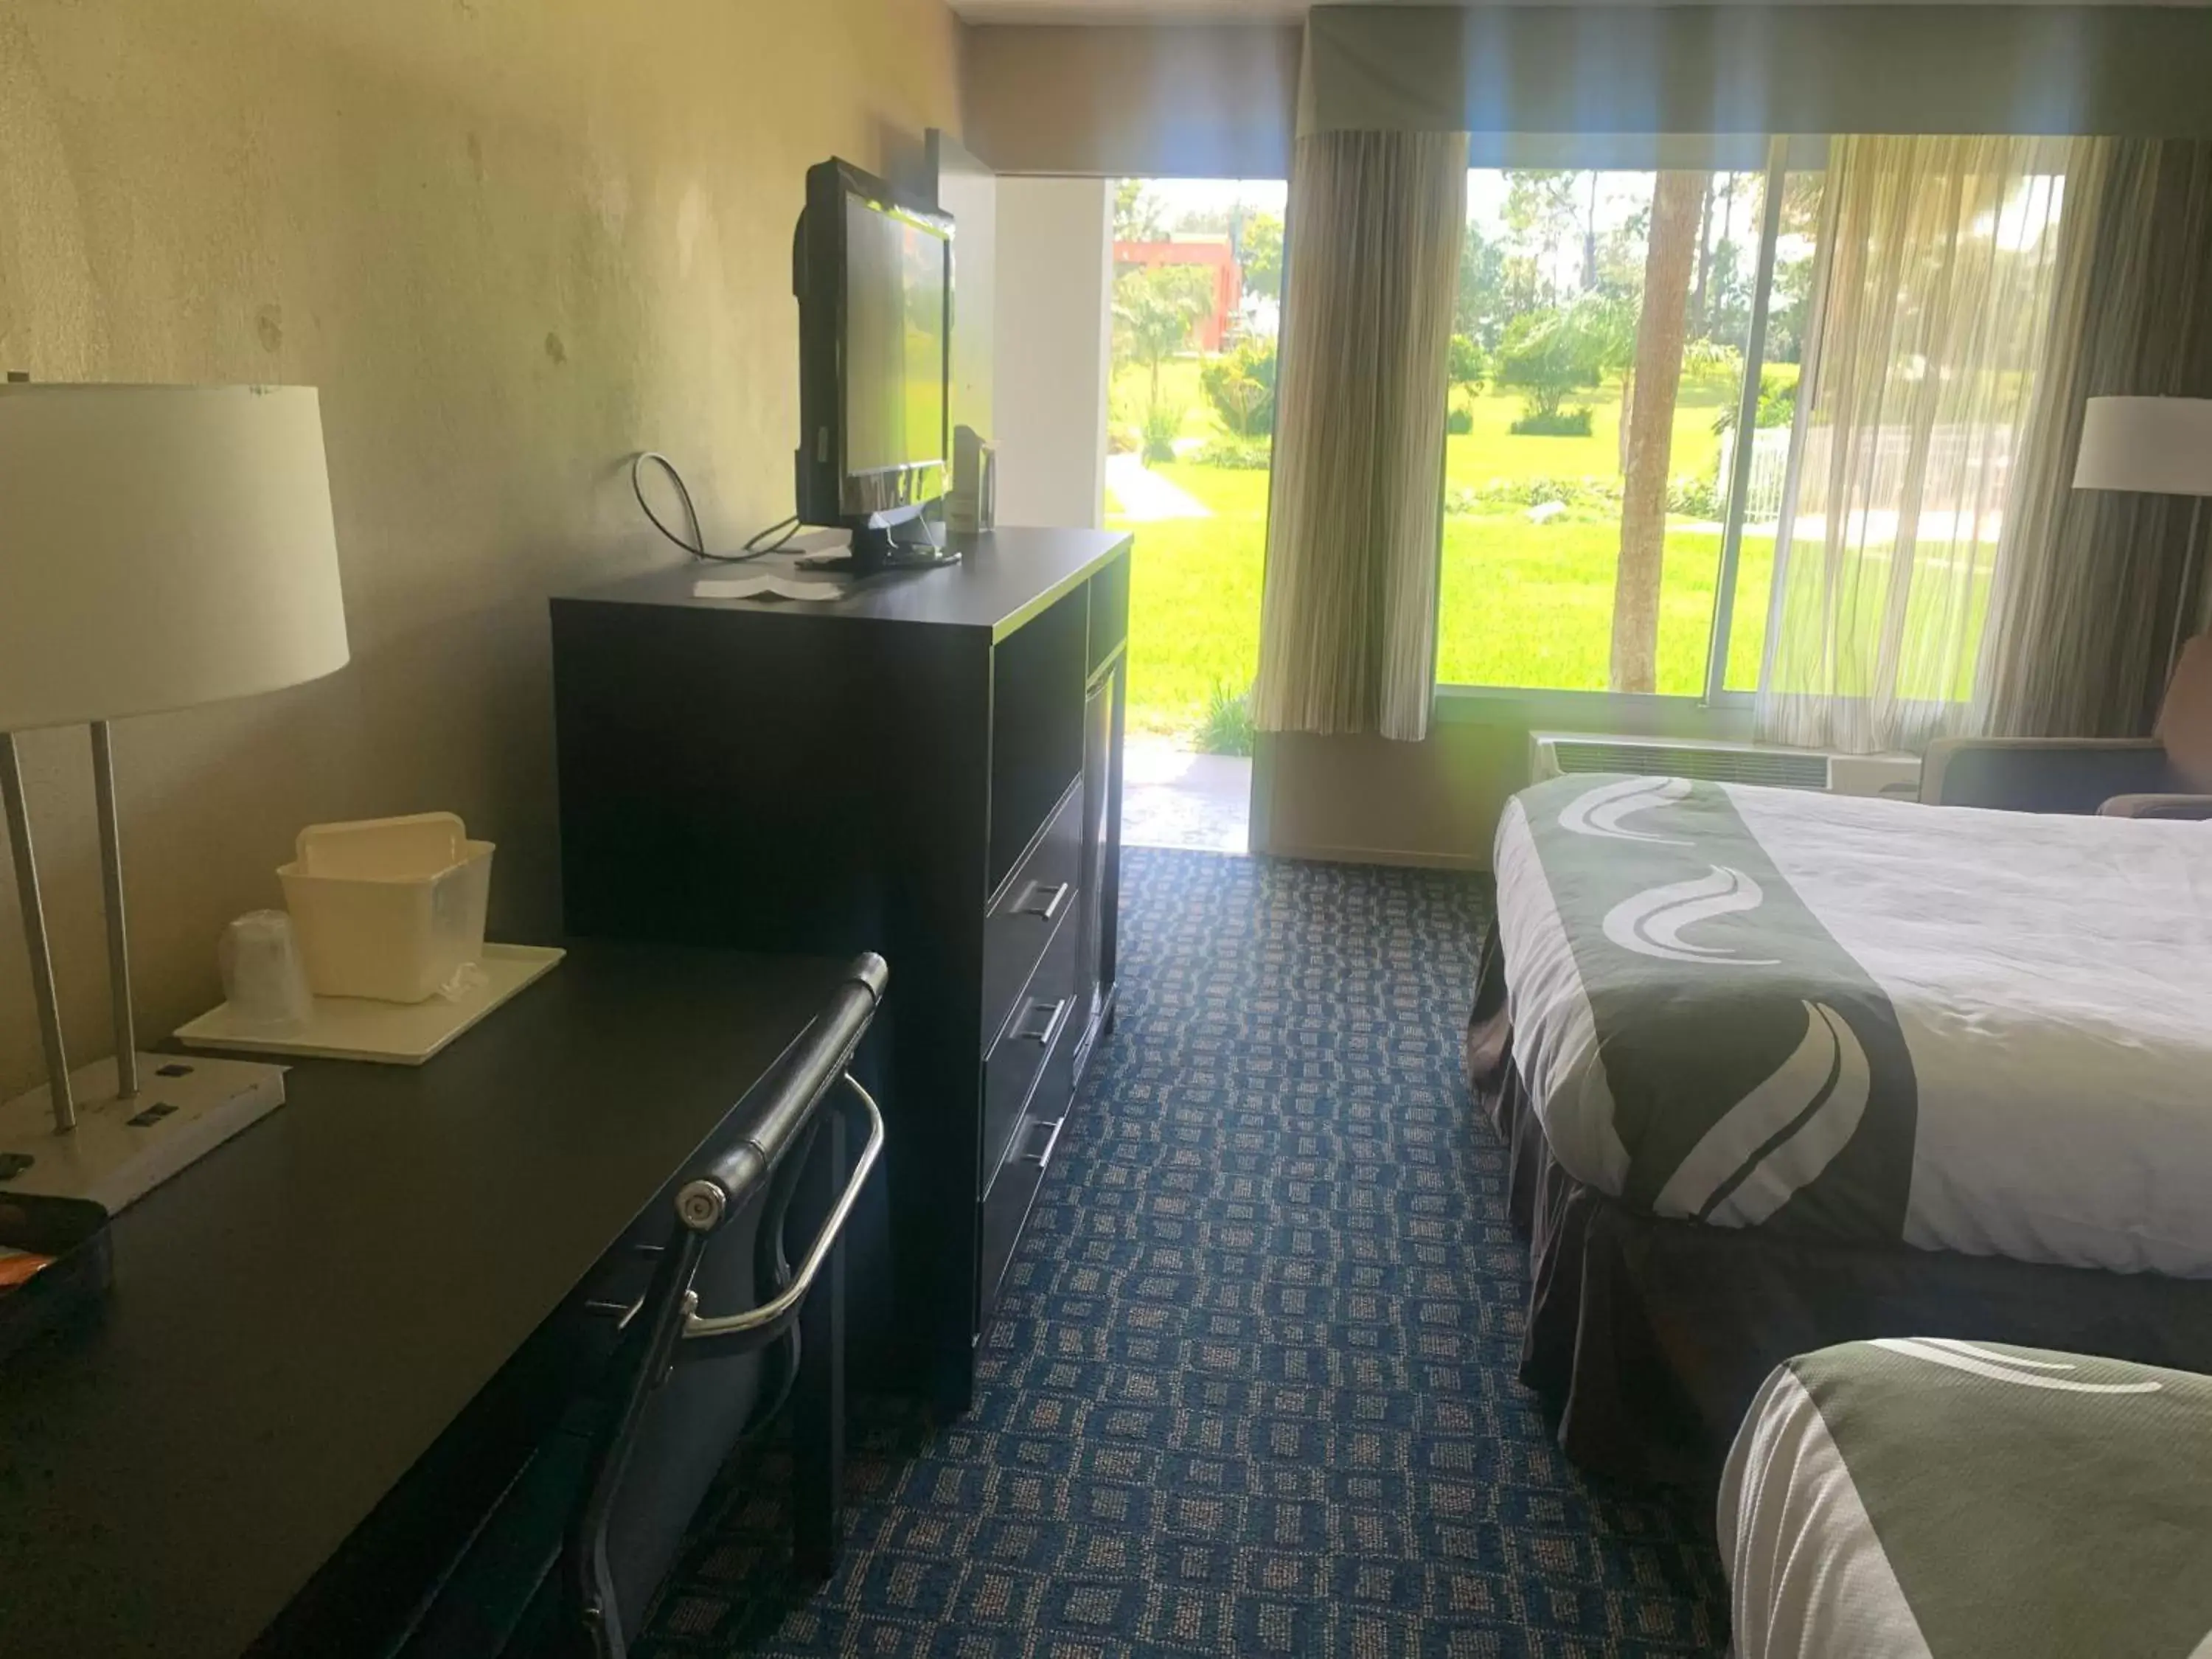 Upgrade Queen Room with Two Queen Beds - Non-Smoking in Quality Inn & Suites Brooksville I-75/Dade City